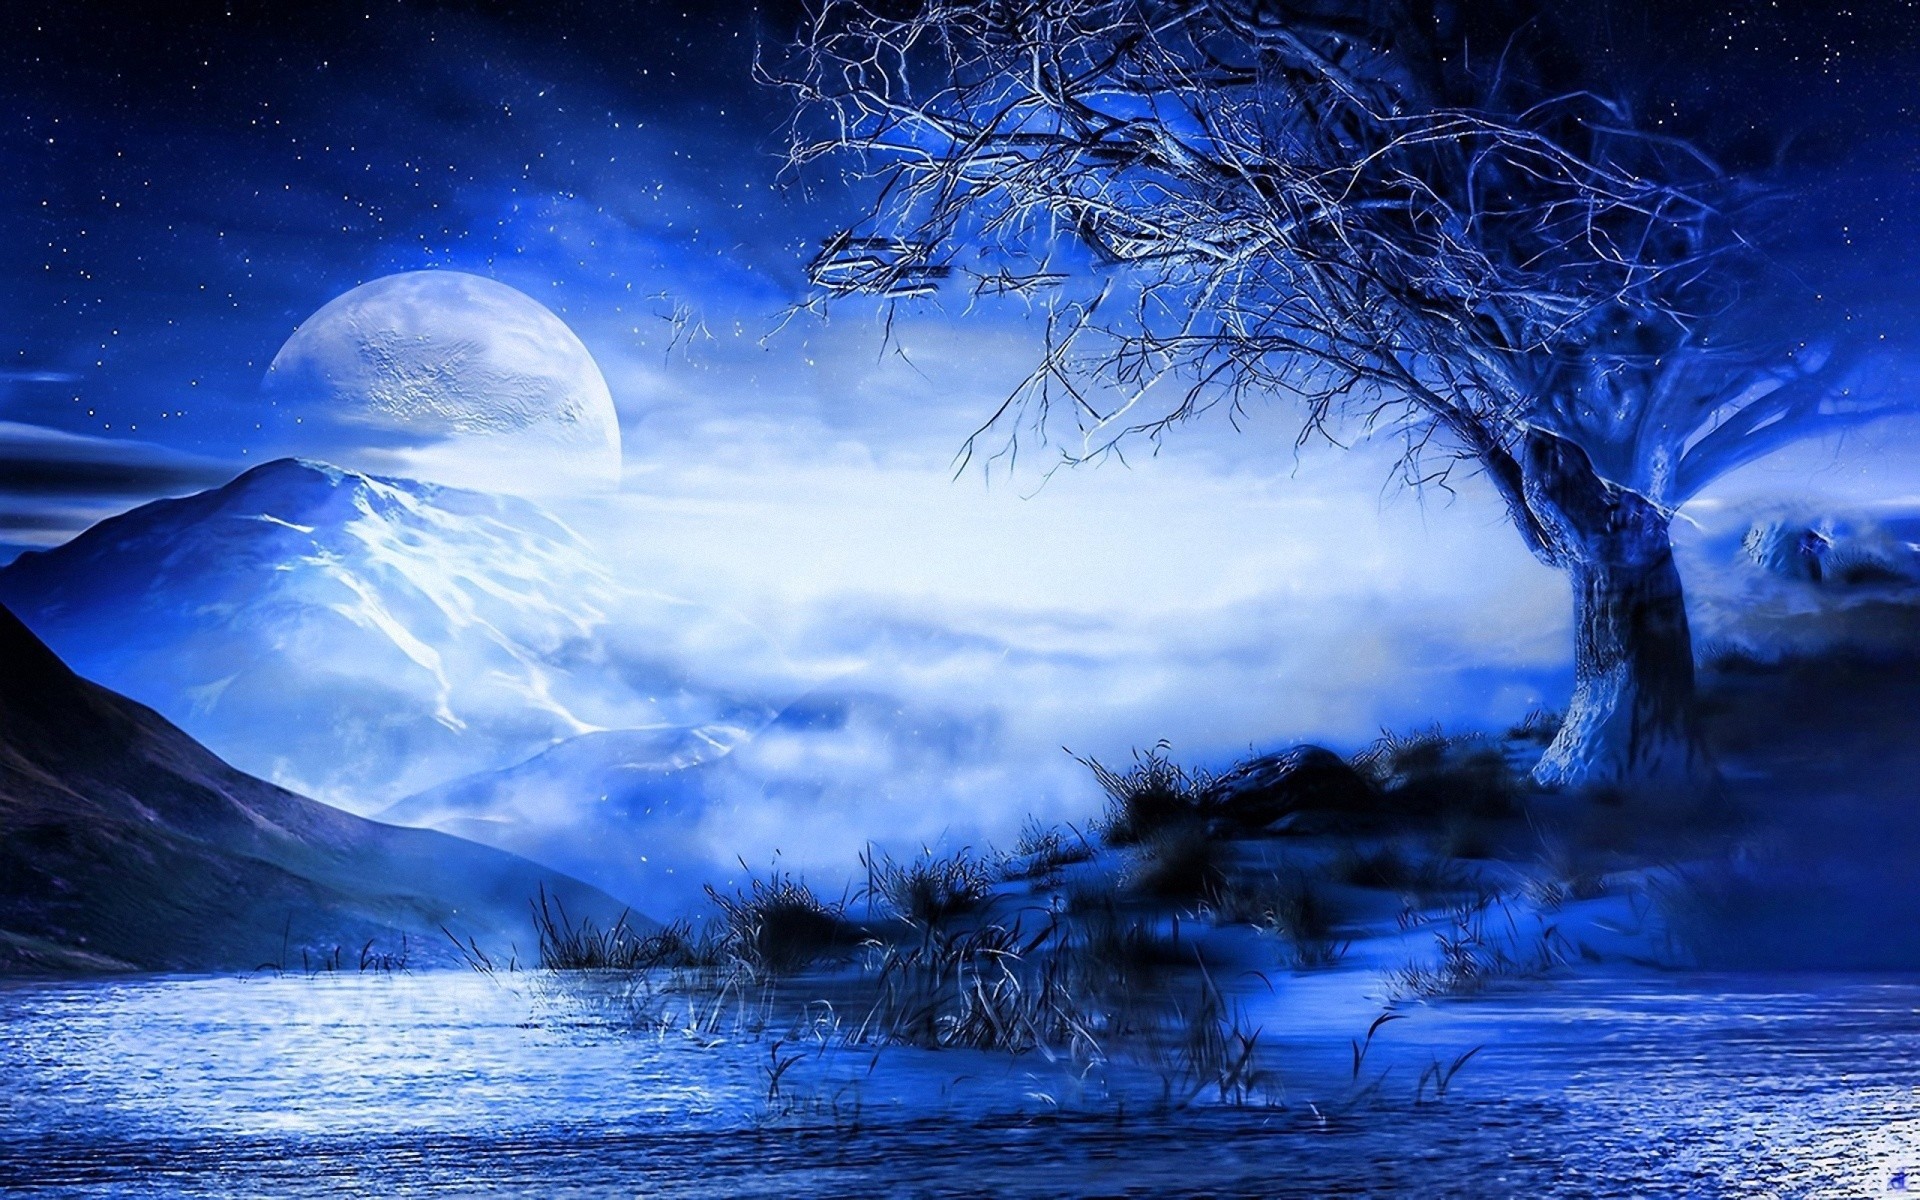 1920x1200  Anime Blue Moon Wallpaper HD And Wallpapers Full HD Archived at |  HD Wallpapers | Pinterest | Blue moon, Hd wallpaper and Wallpaper